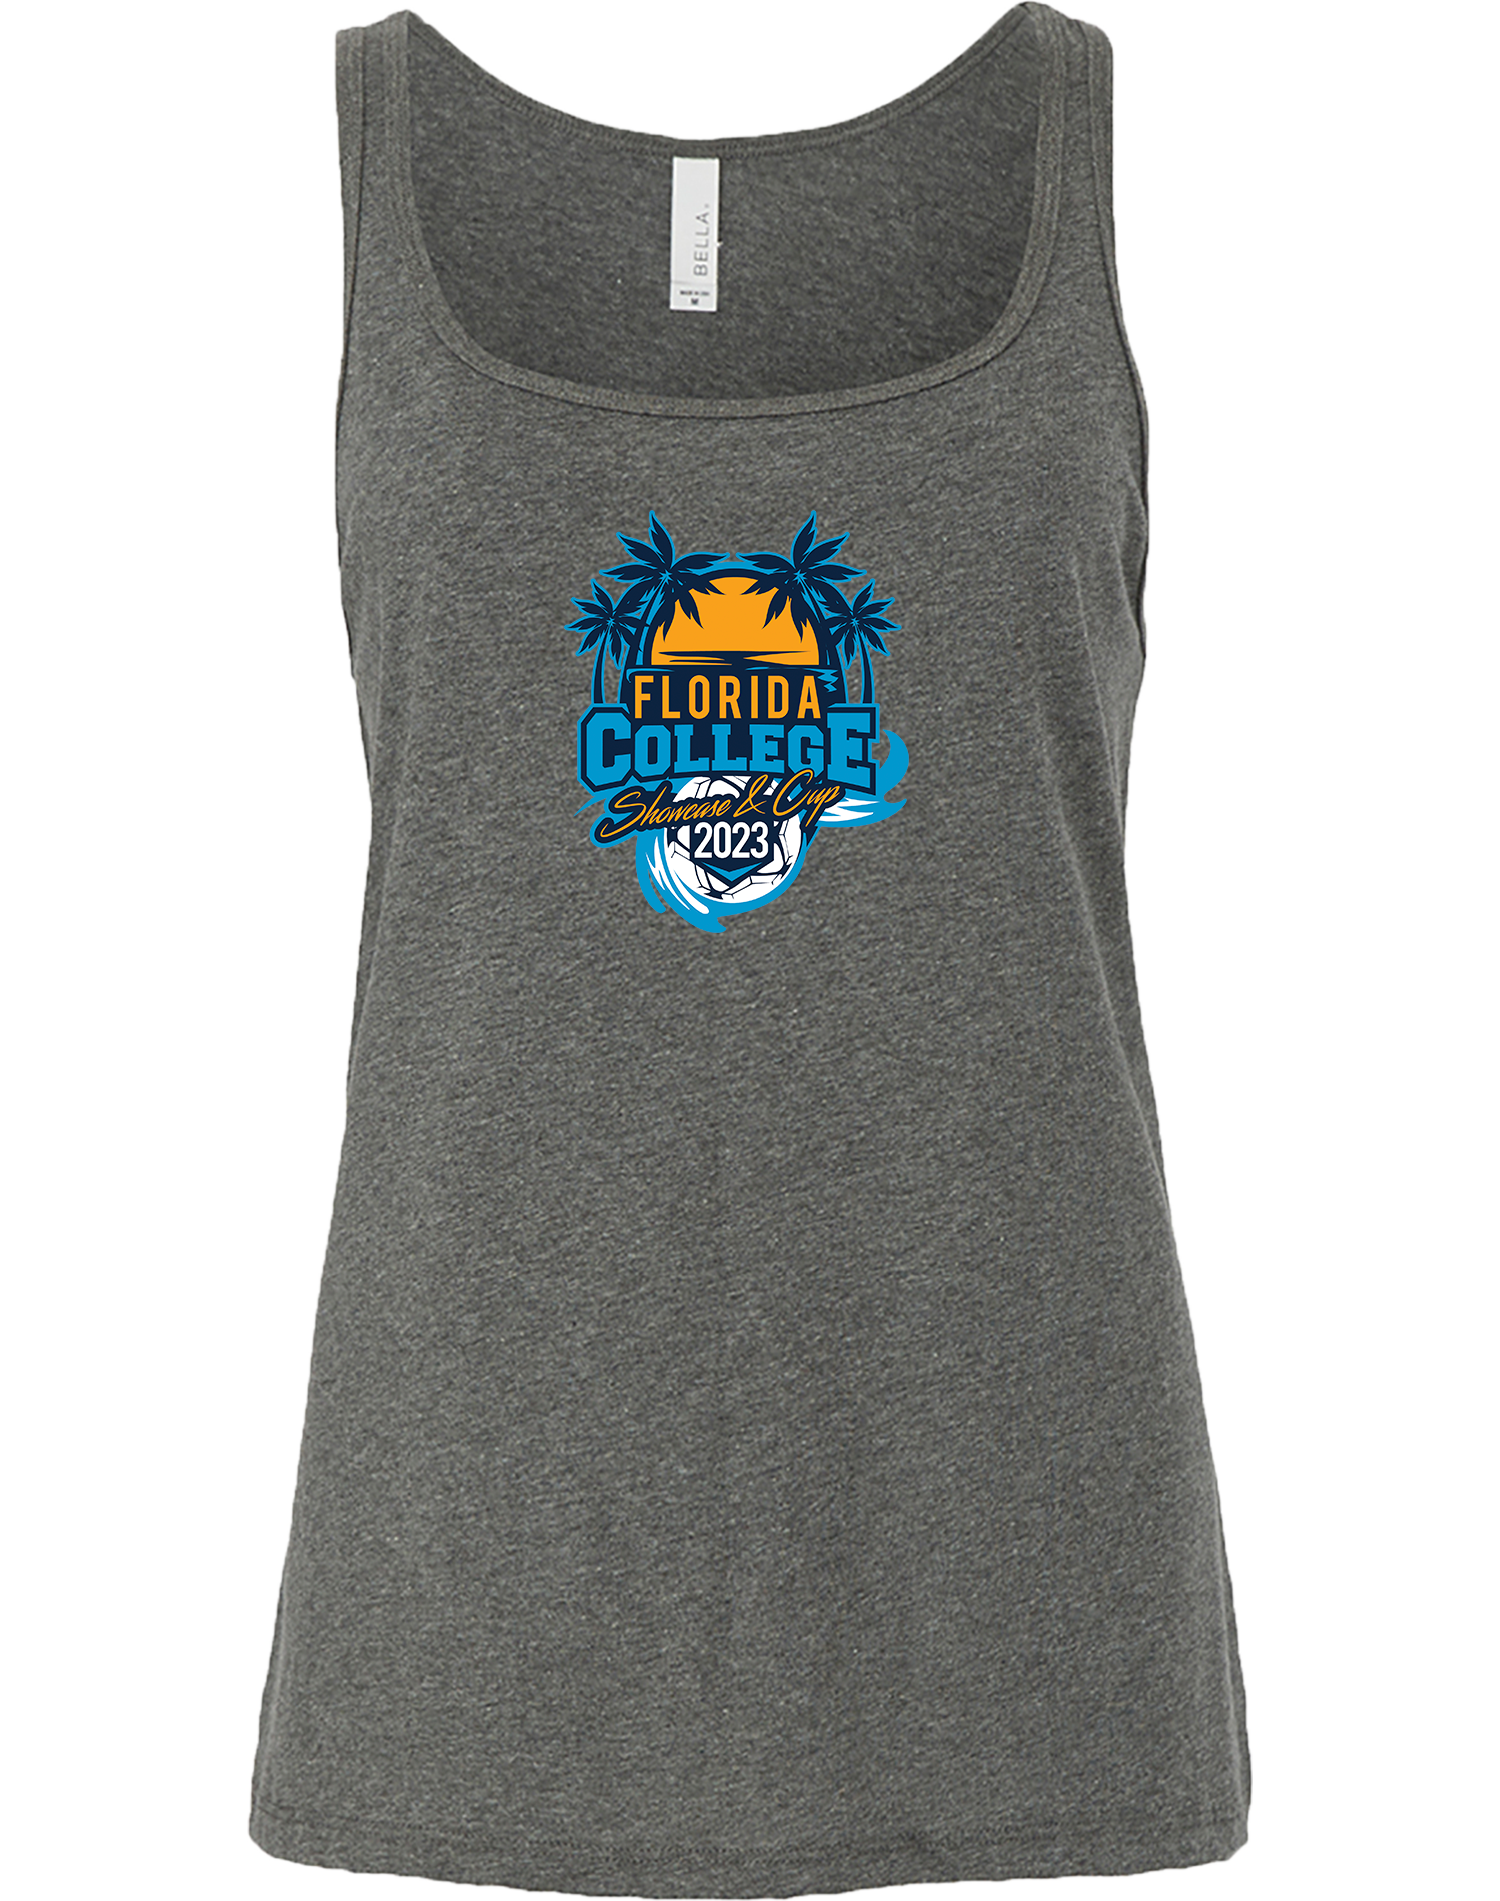 TANK TOP - 2023 Florida College Showcase and Cup